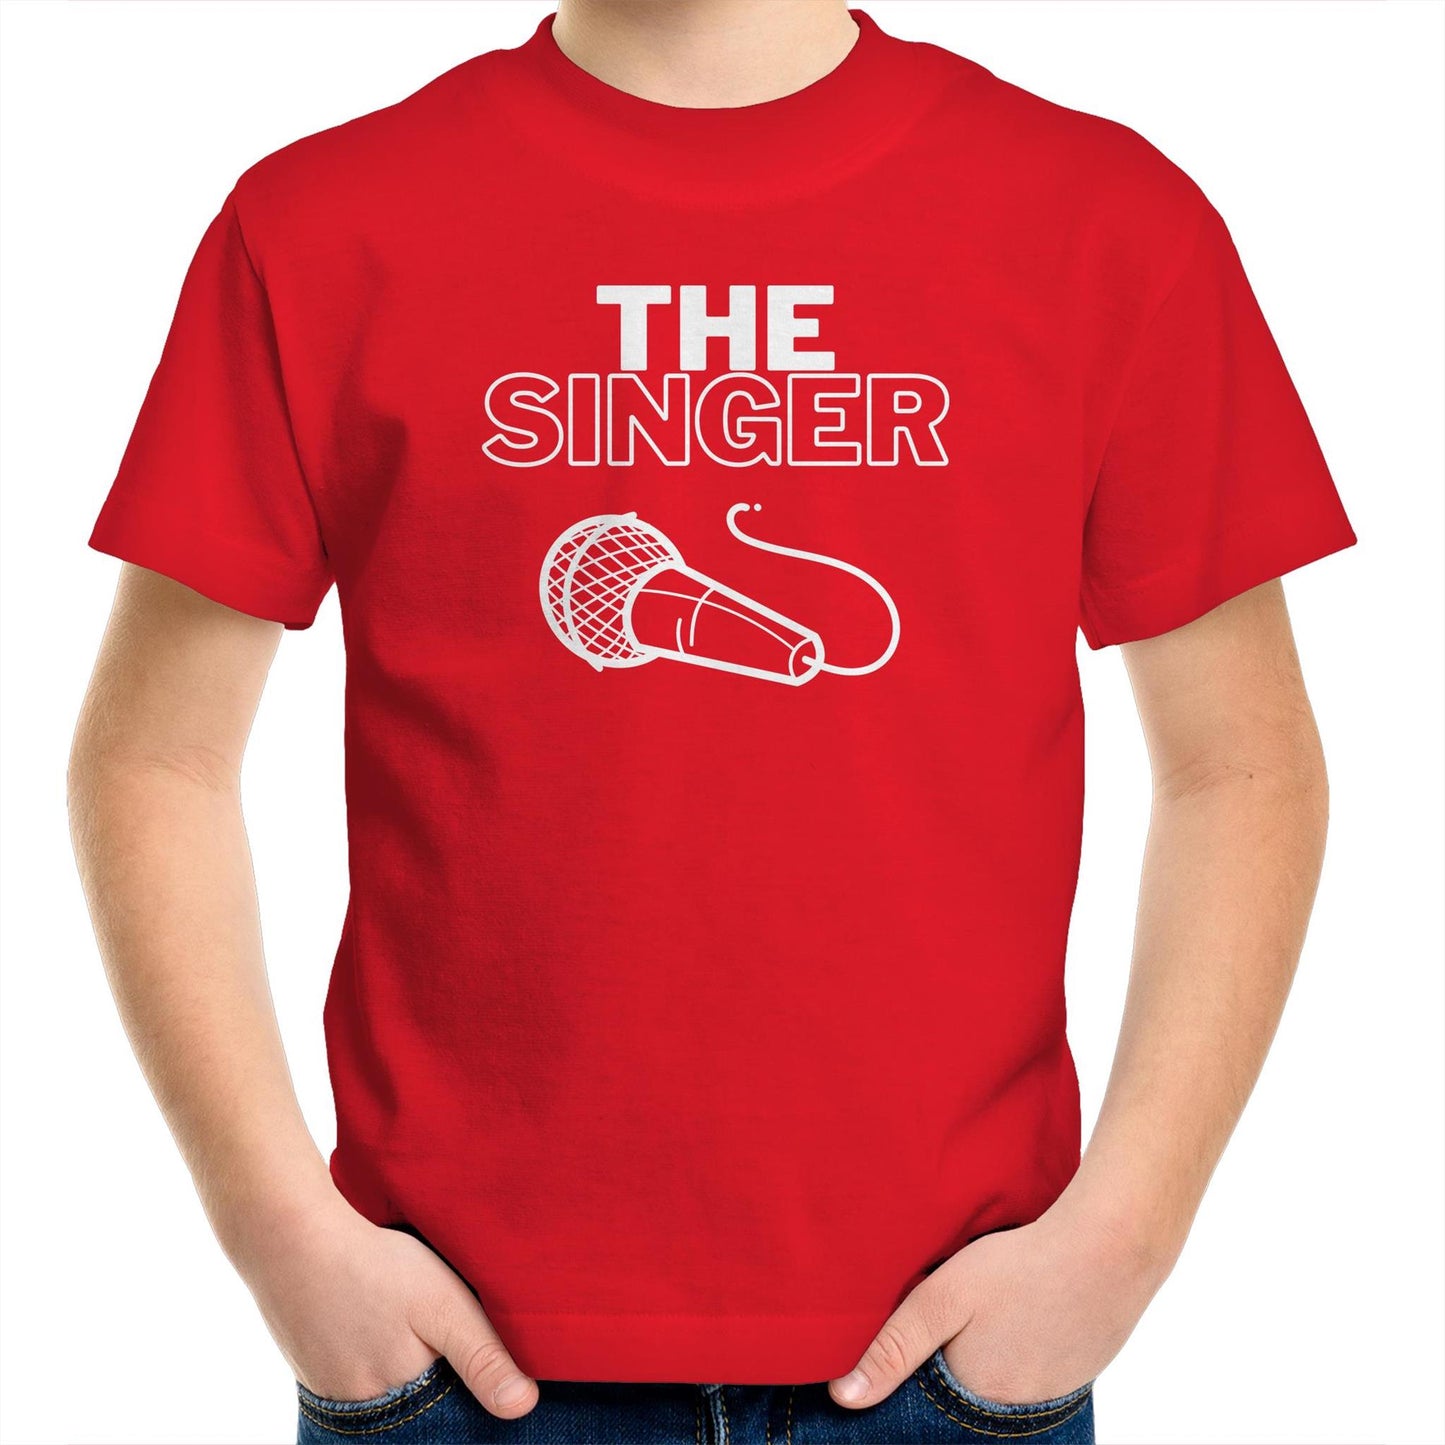 The Singer - Kids Youth T-Shirt Red Kids Youth T-shirt Music